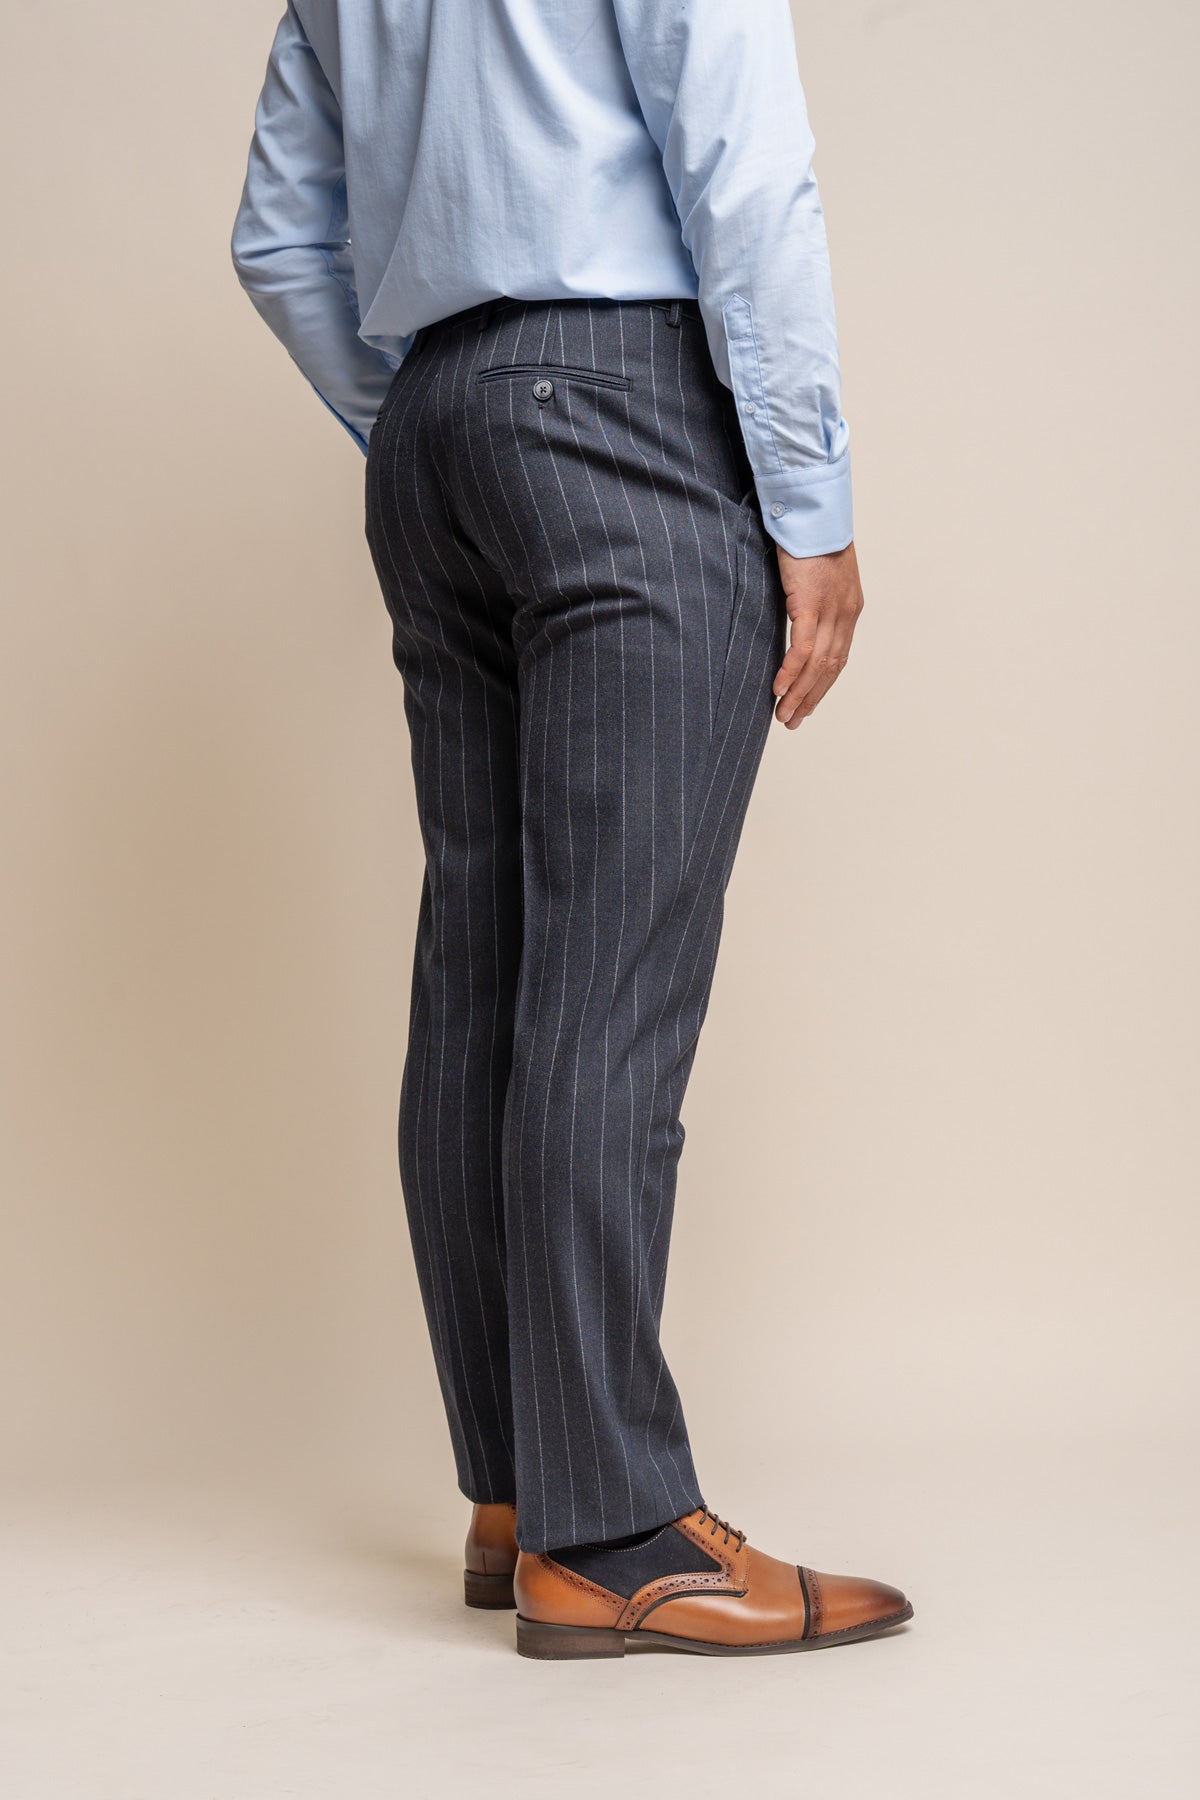 Invincible Navy Pinstripe 2 Piece Wedding Suit - Suits - - Swagger & Swoon